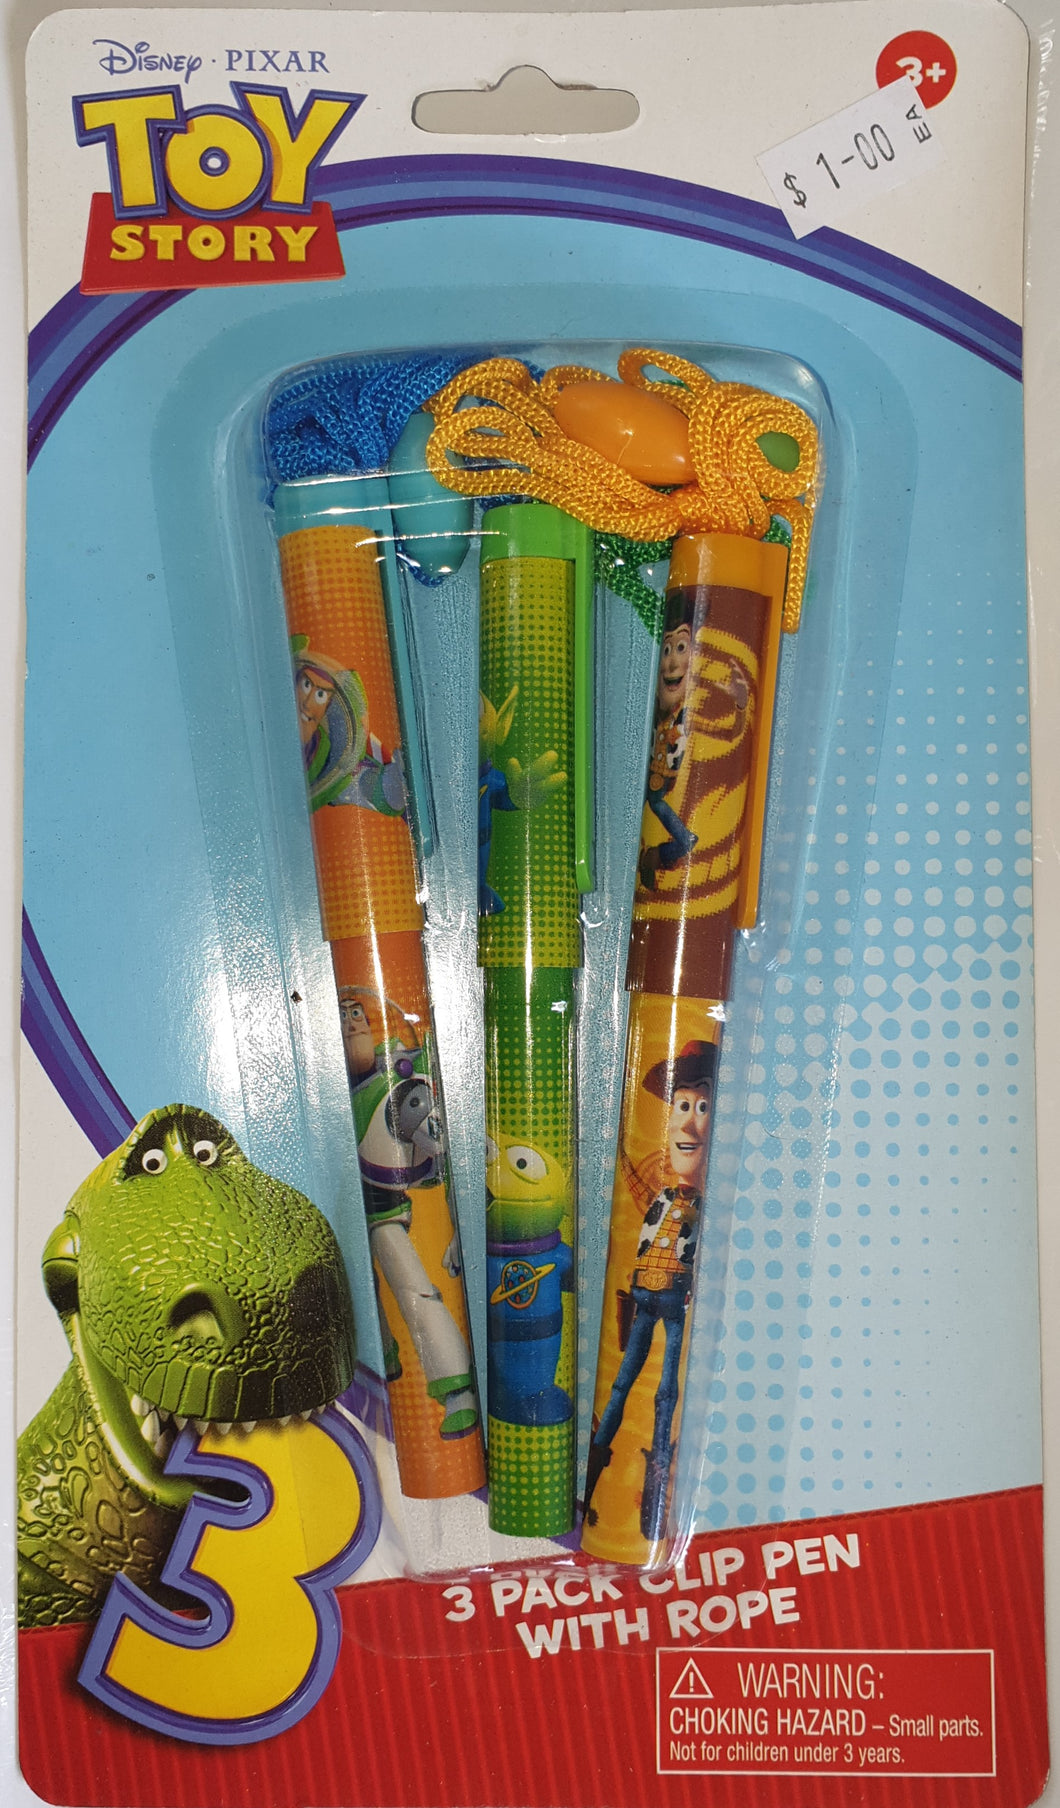 Toy story 3 pack clip pen with rope